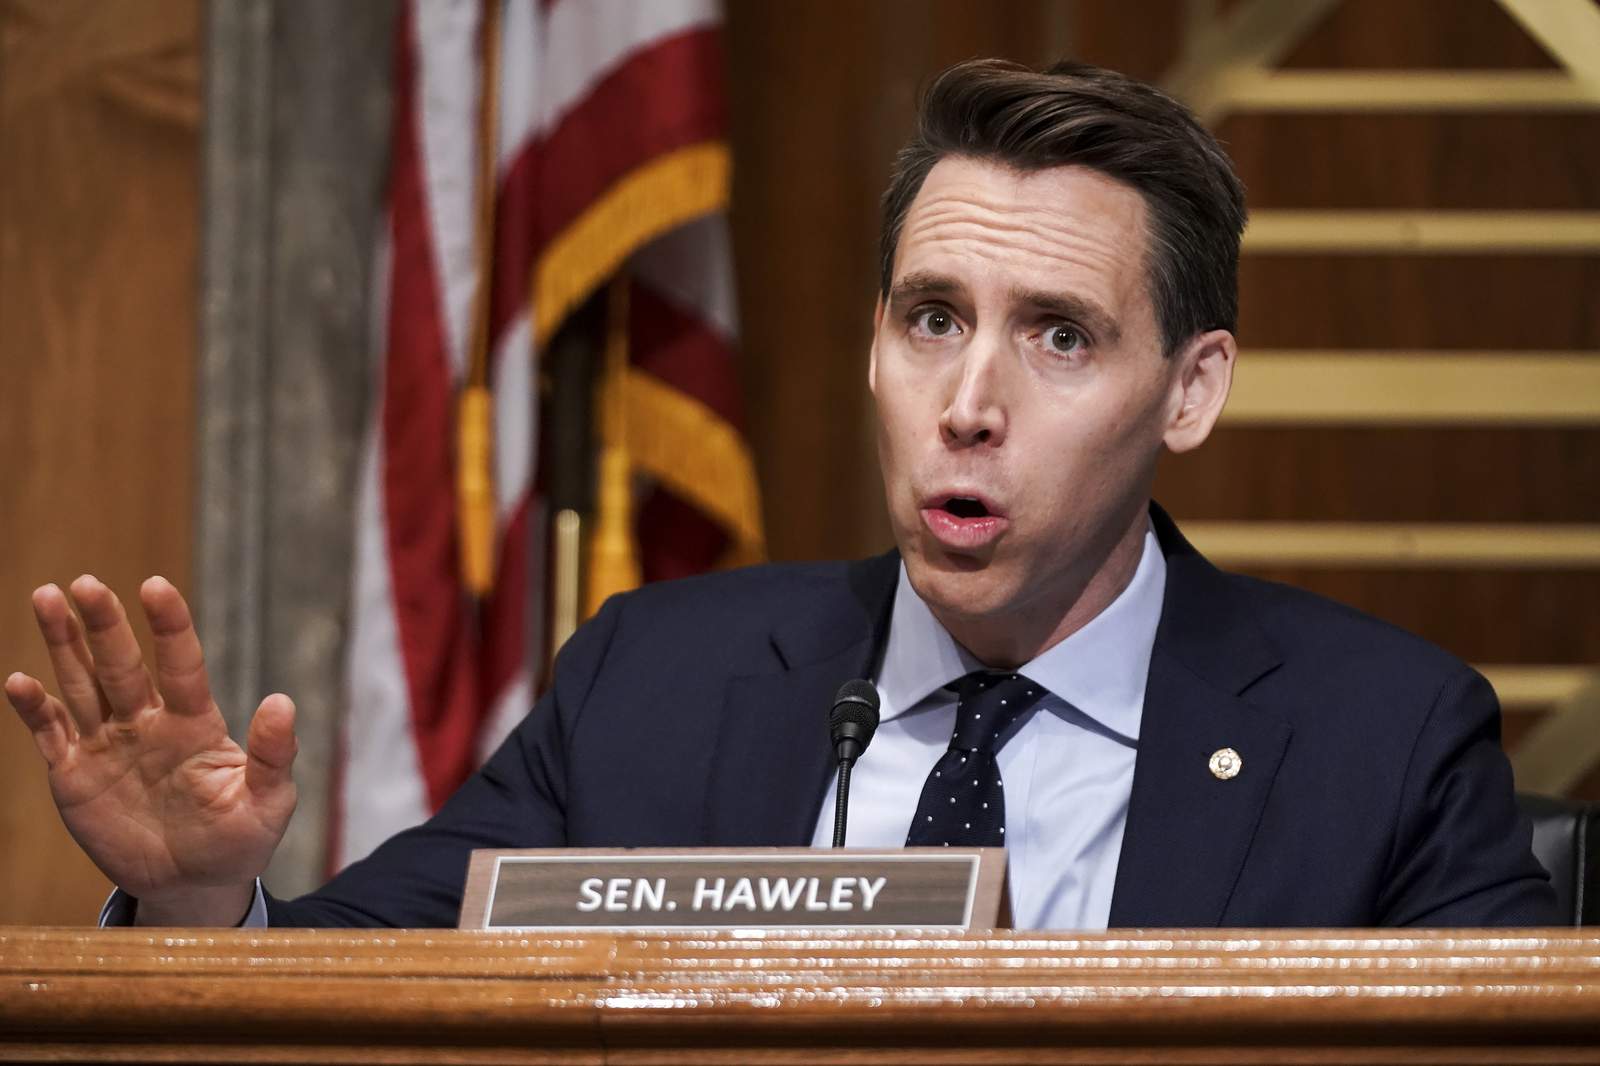 More backlash for GOP’s Hawley as Loews Hotel cancels event